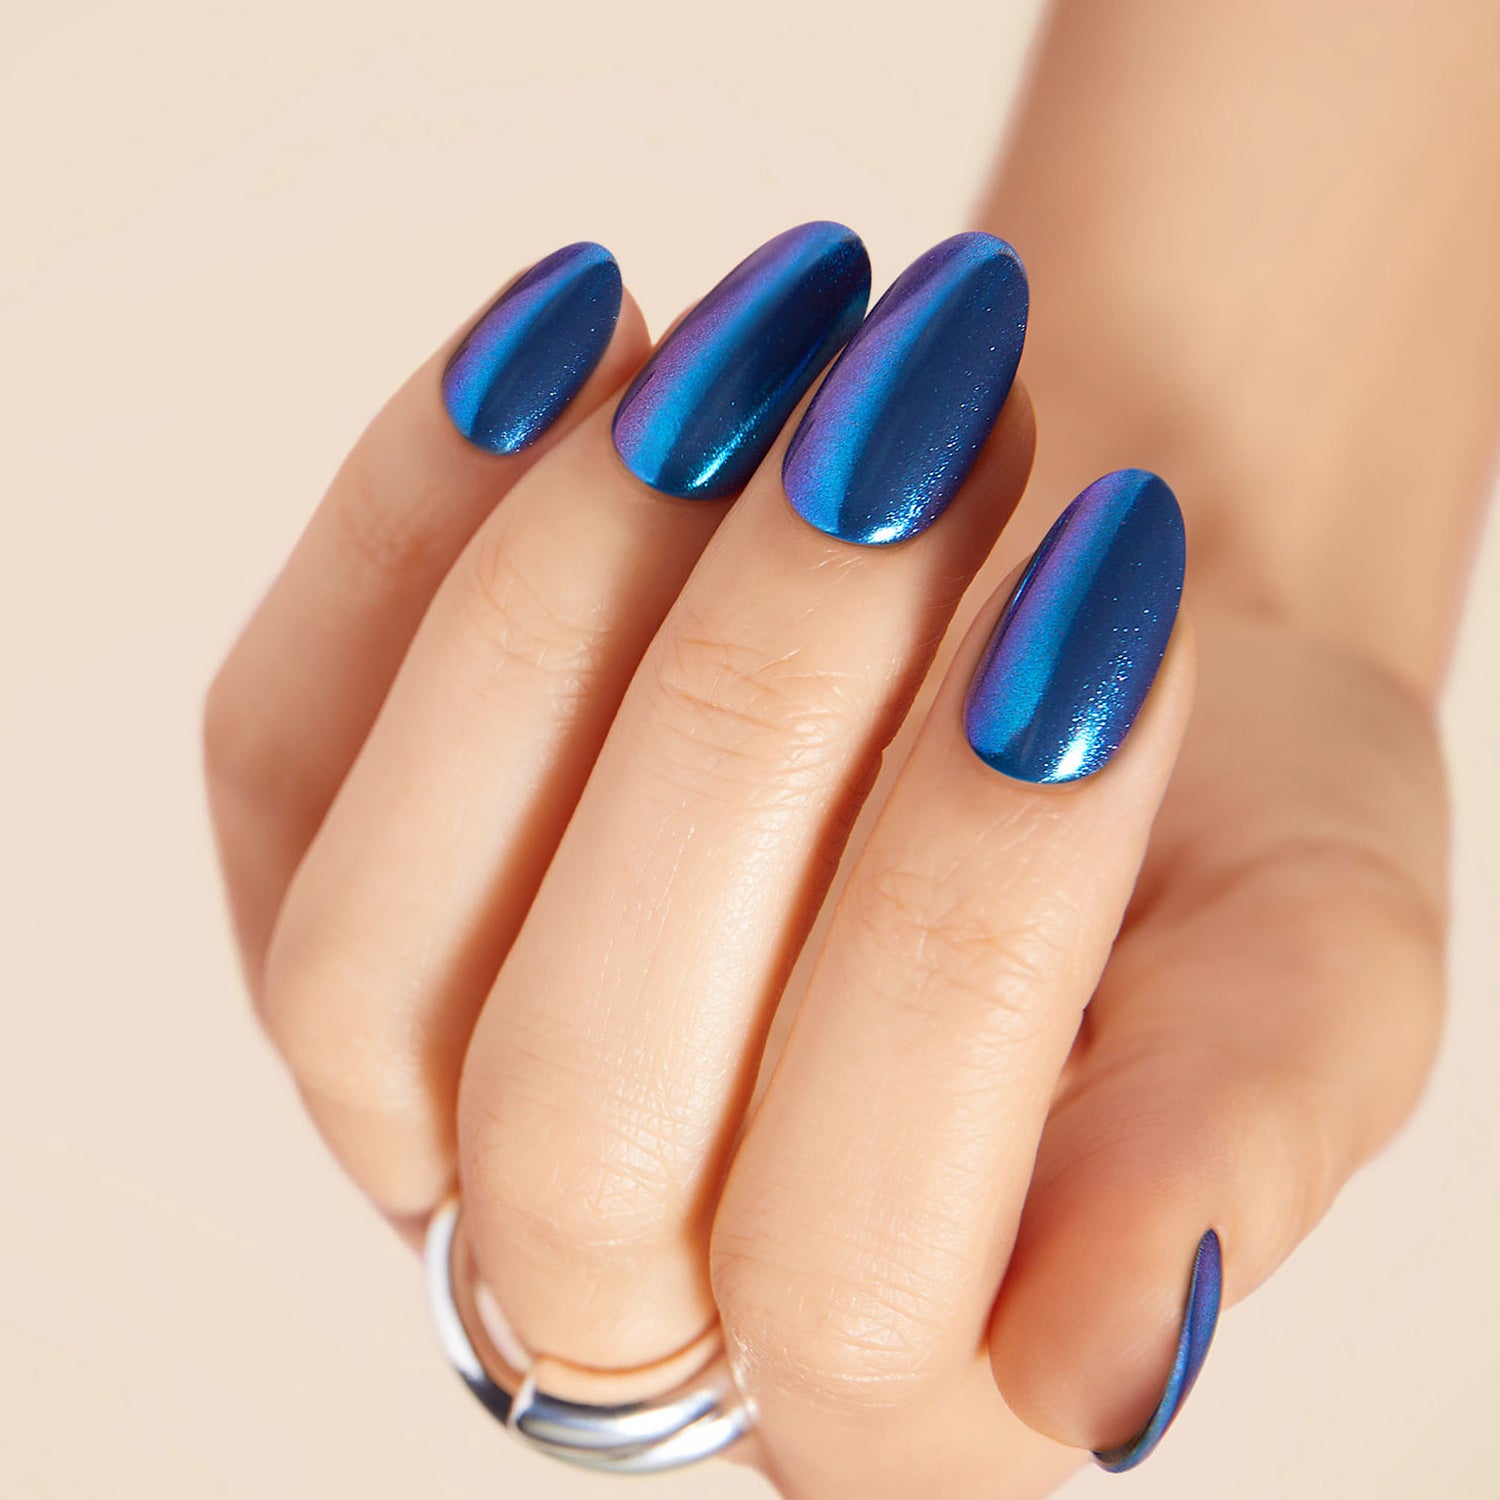  Reflective blue press-on gel nails featuring a medium-length, almond shape, with a metallic chrome finish.